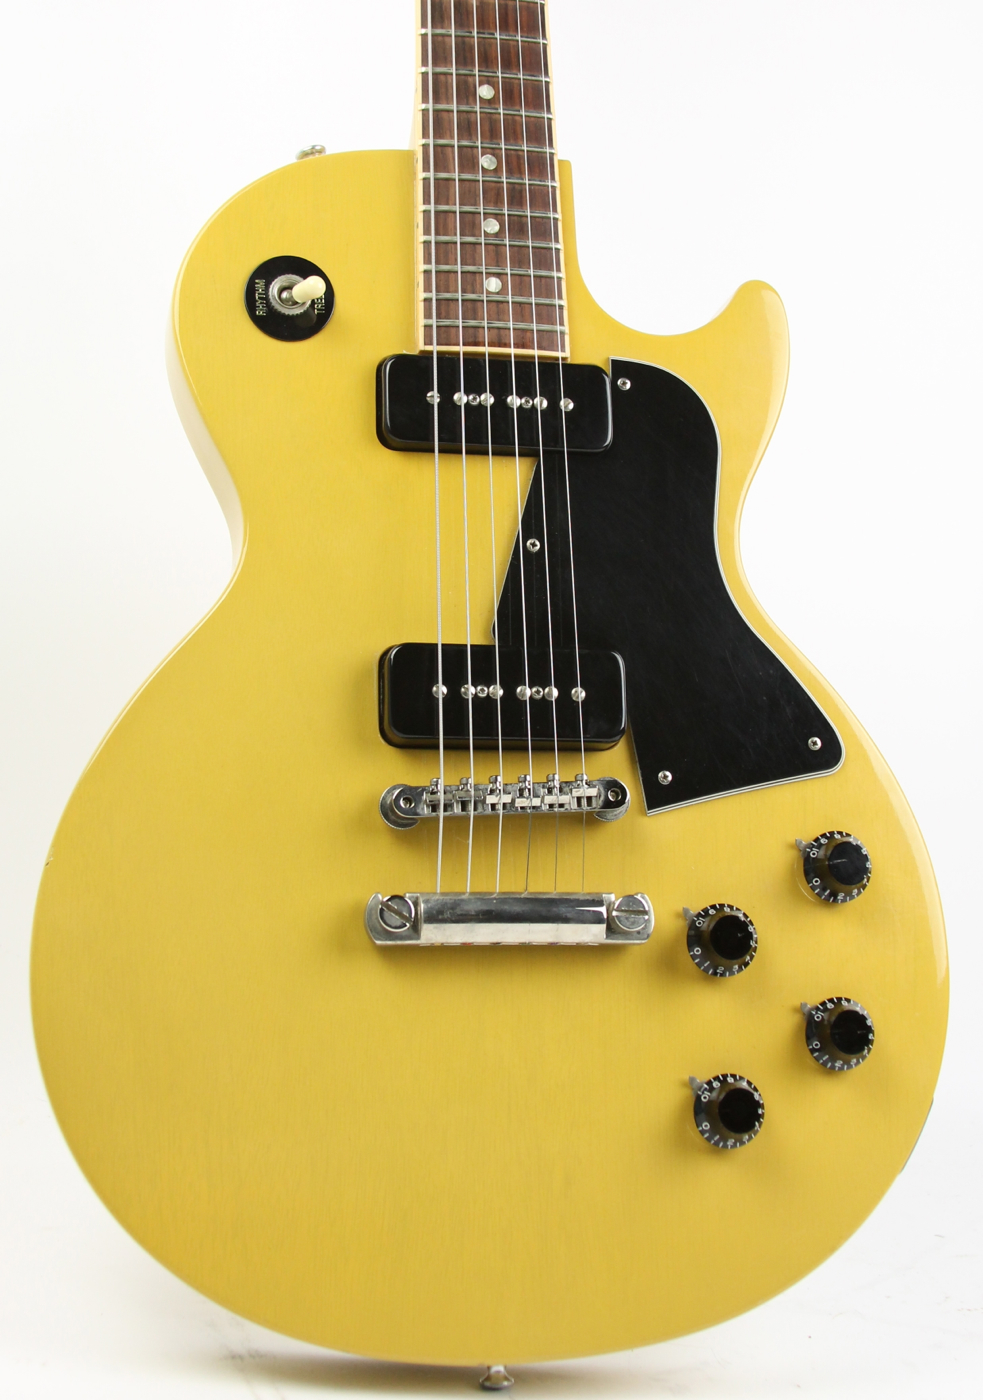 Gibson Les Paul Special 1996 Tv Yellow Guitar For Sale Thunder Road Guitars